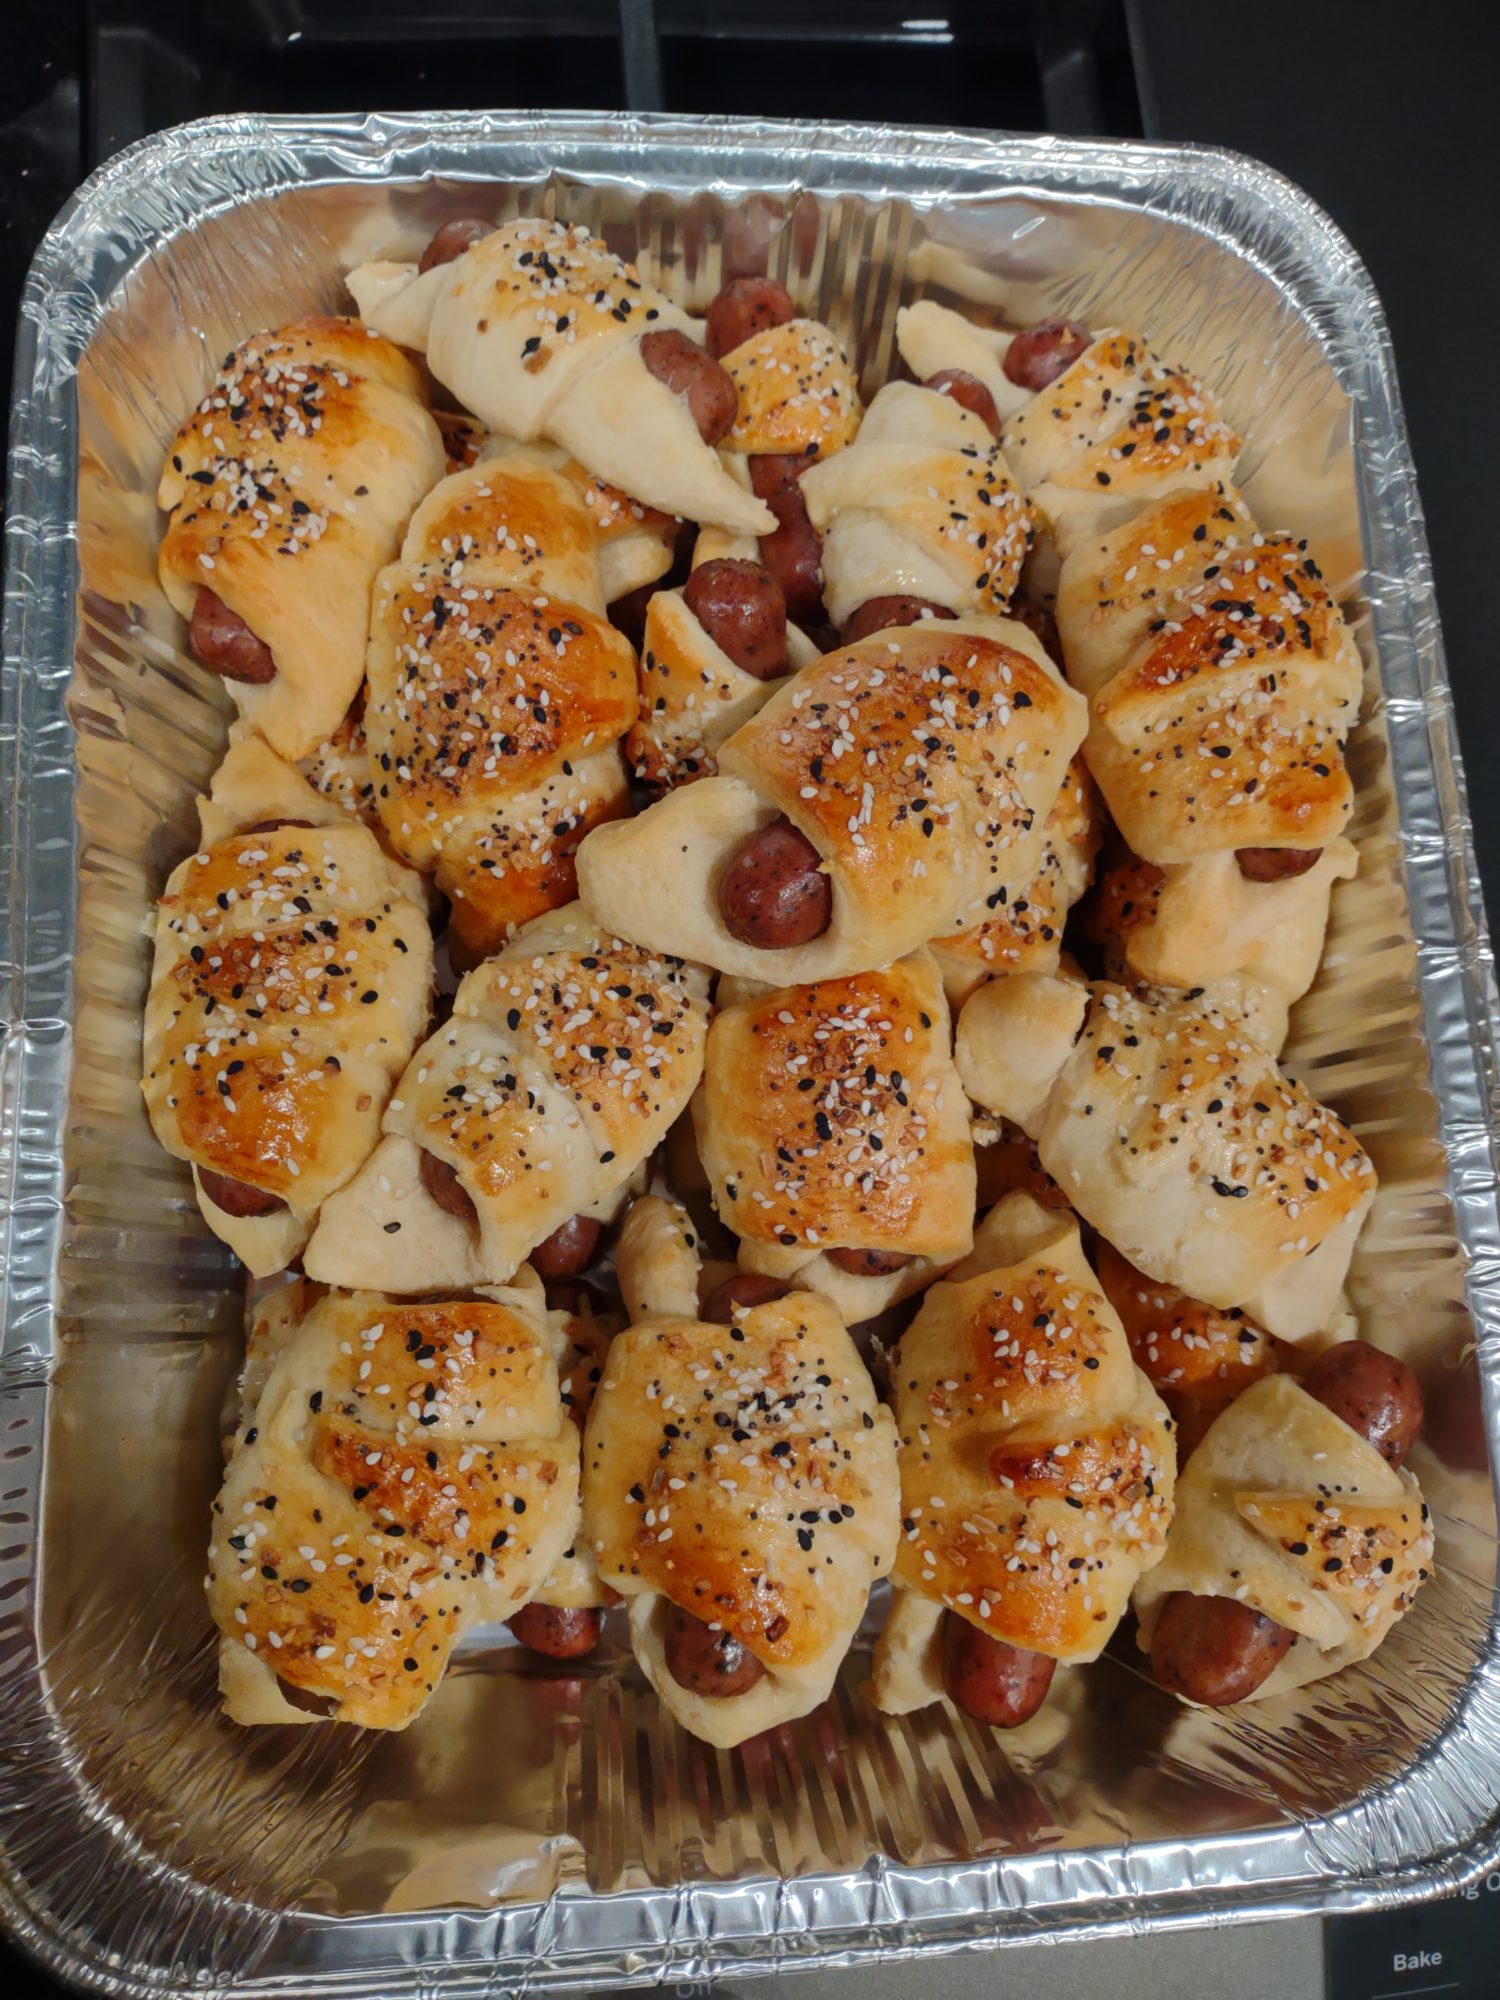 Breakfast Pigs in a Blanket – Let's Share Recipes!